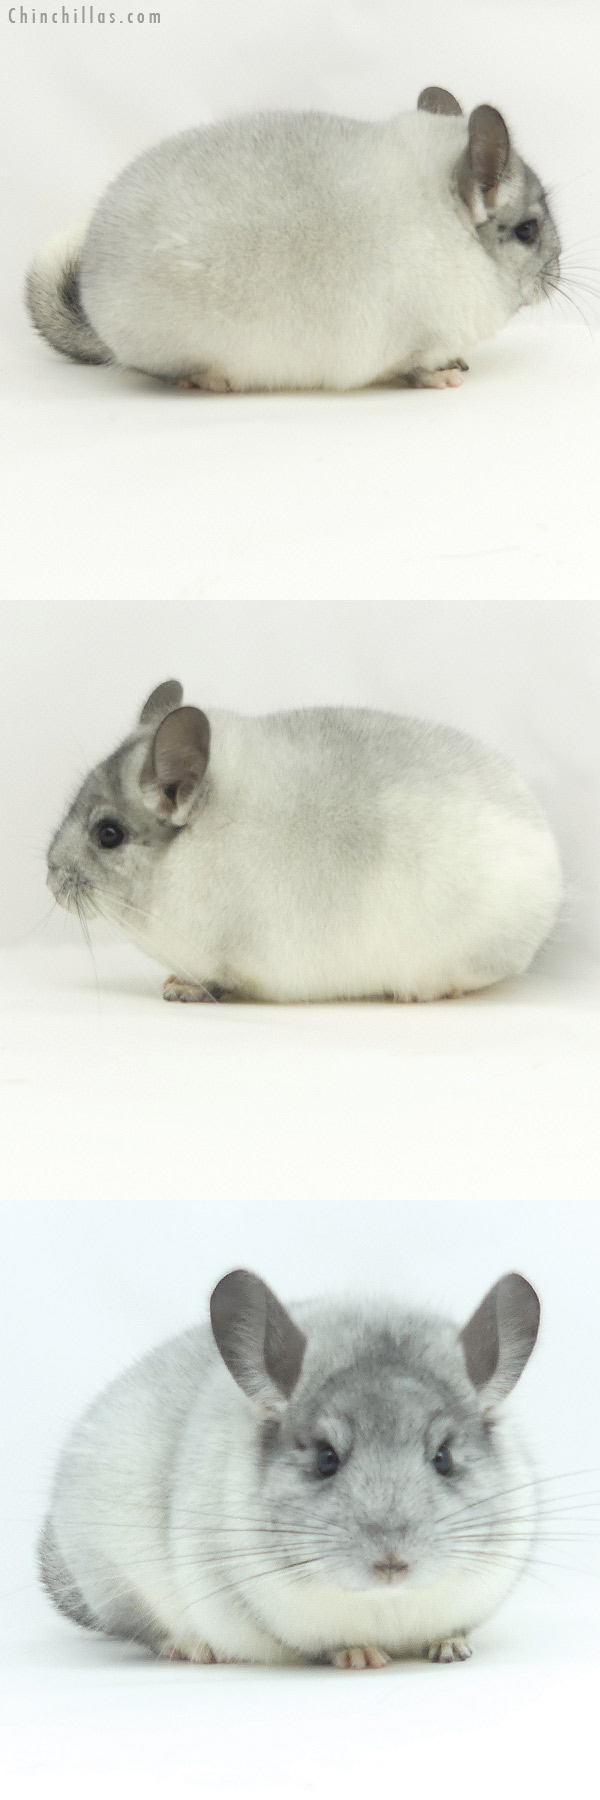 Chinchilla or related item offered for sale or export on Chinchillas.com - 20129 Blocky Herd Improvement Quality White Mosaic Male Chinchilla